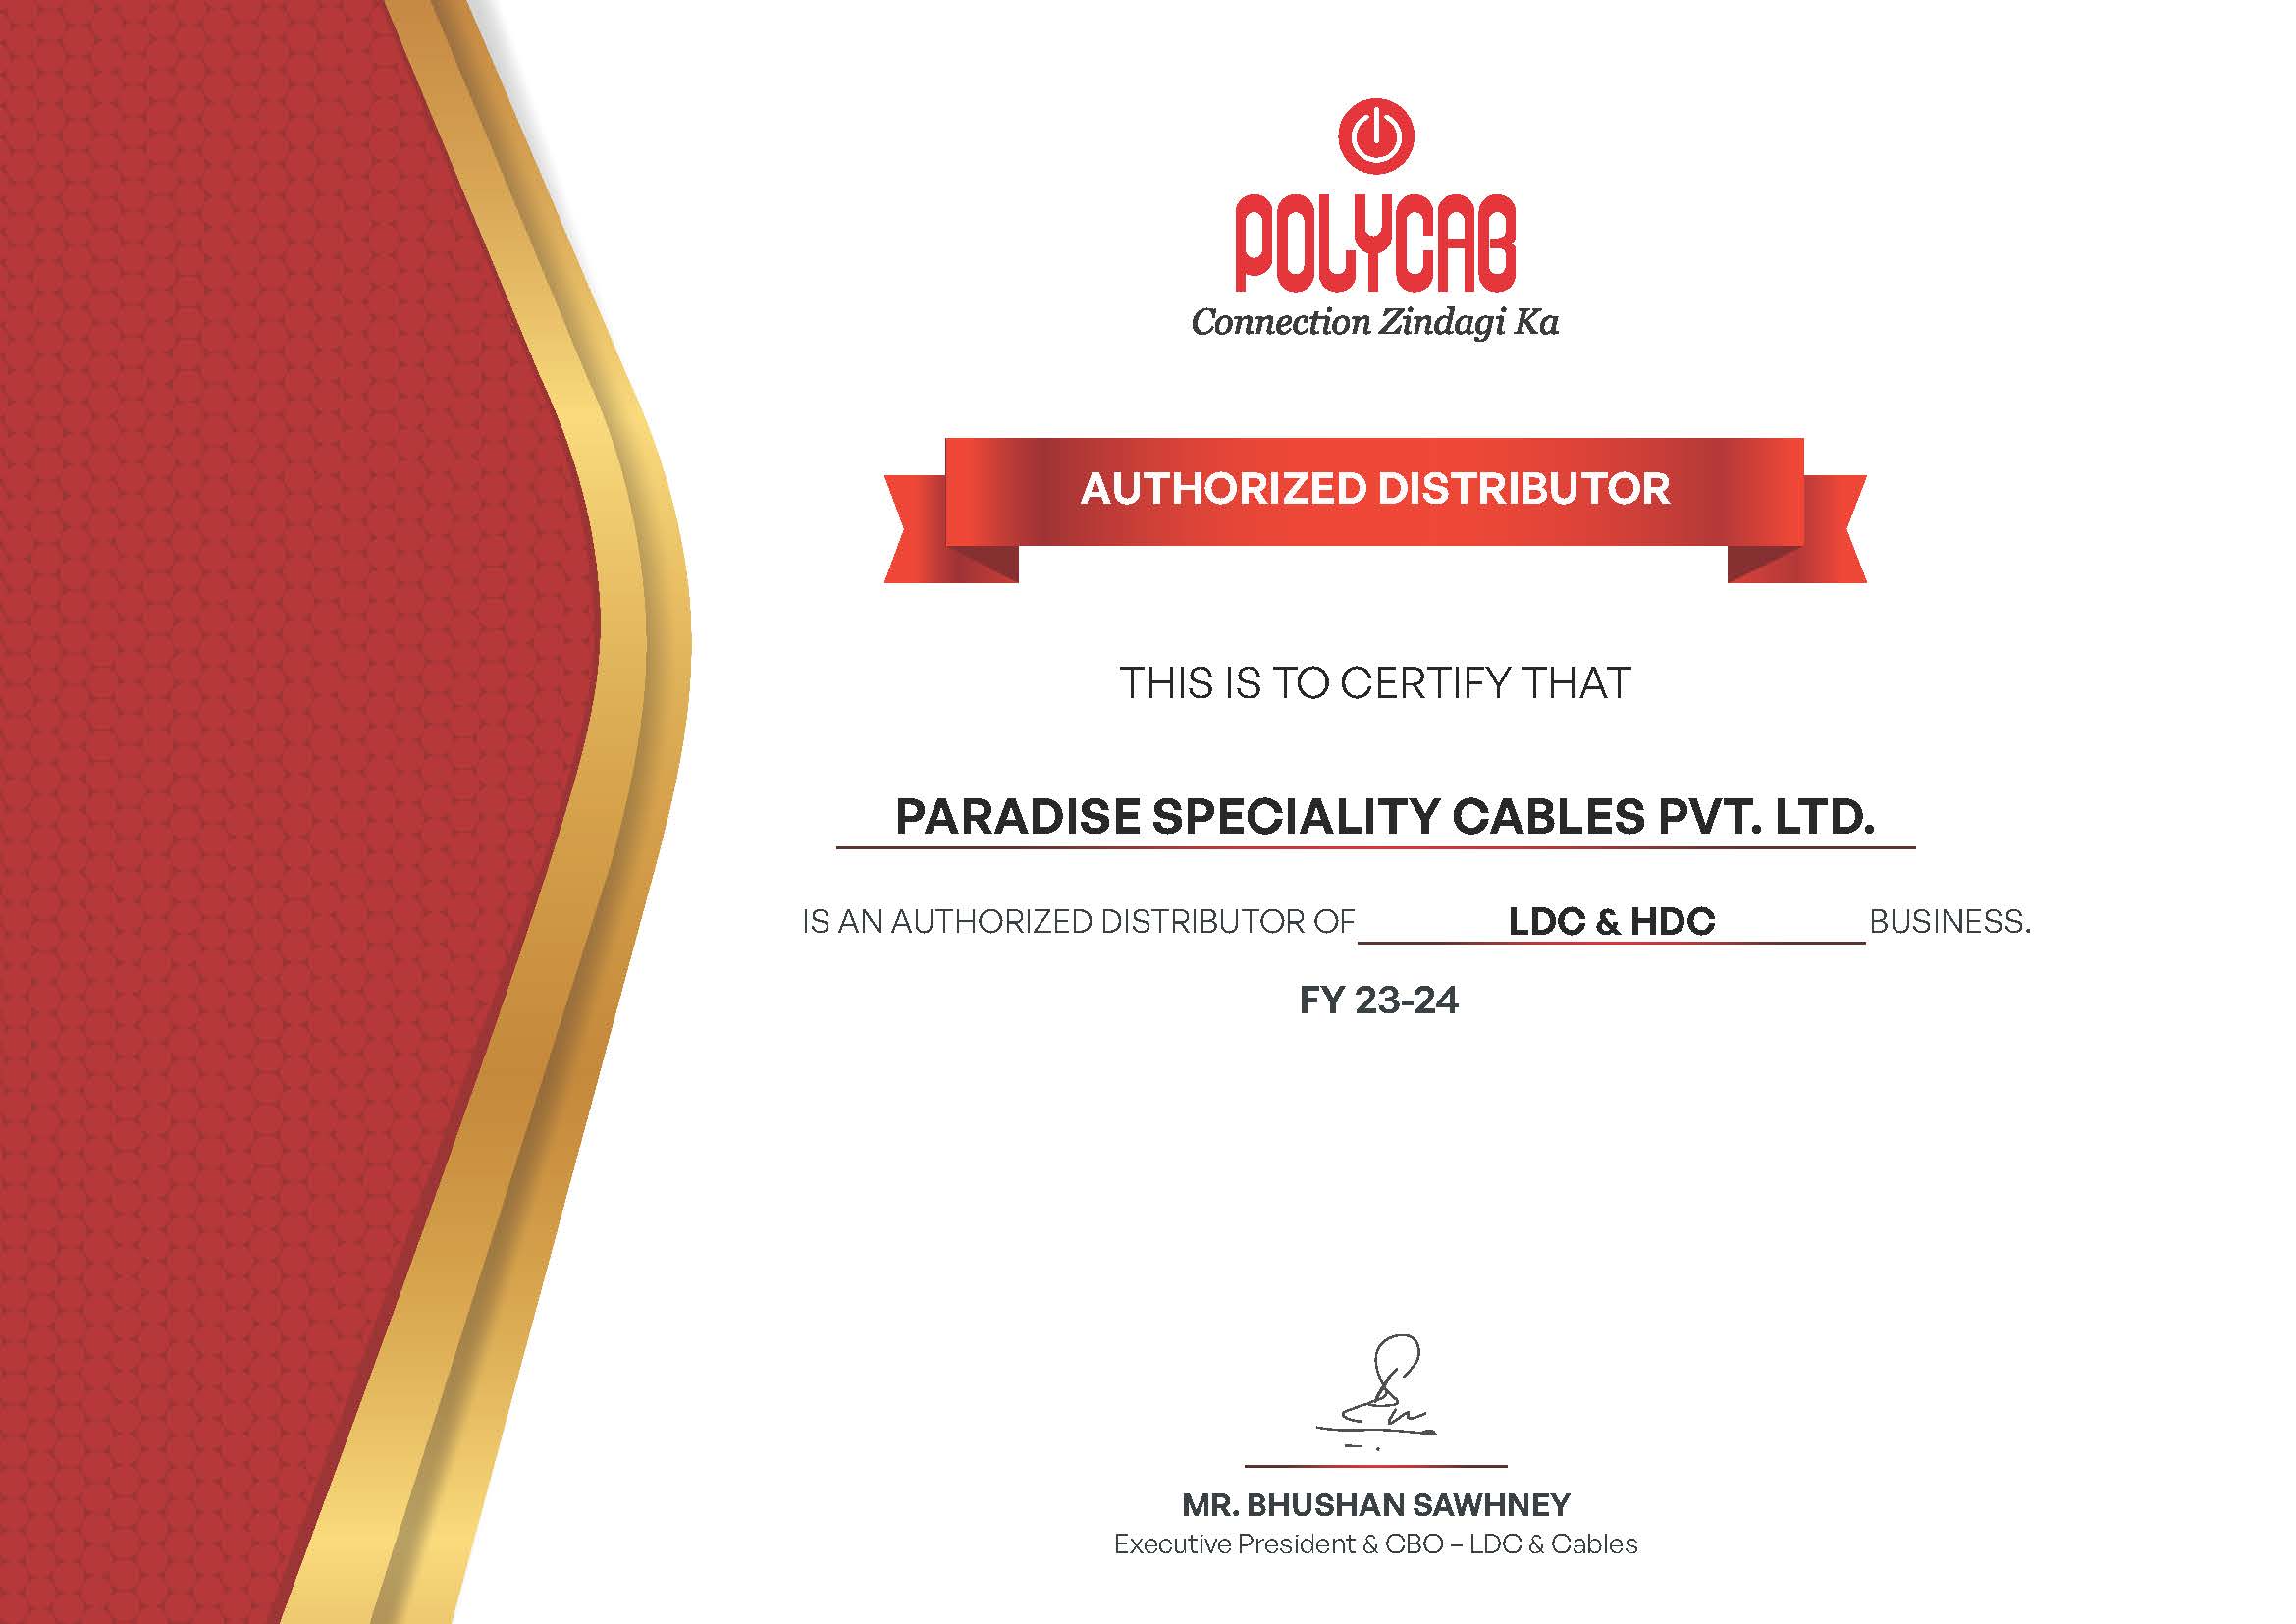 Polycab Authorized Distributor Certificate